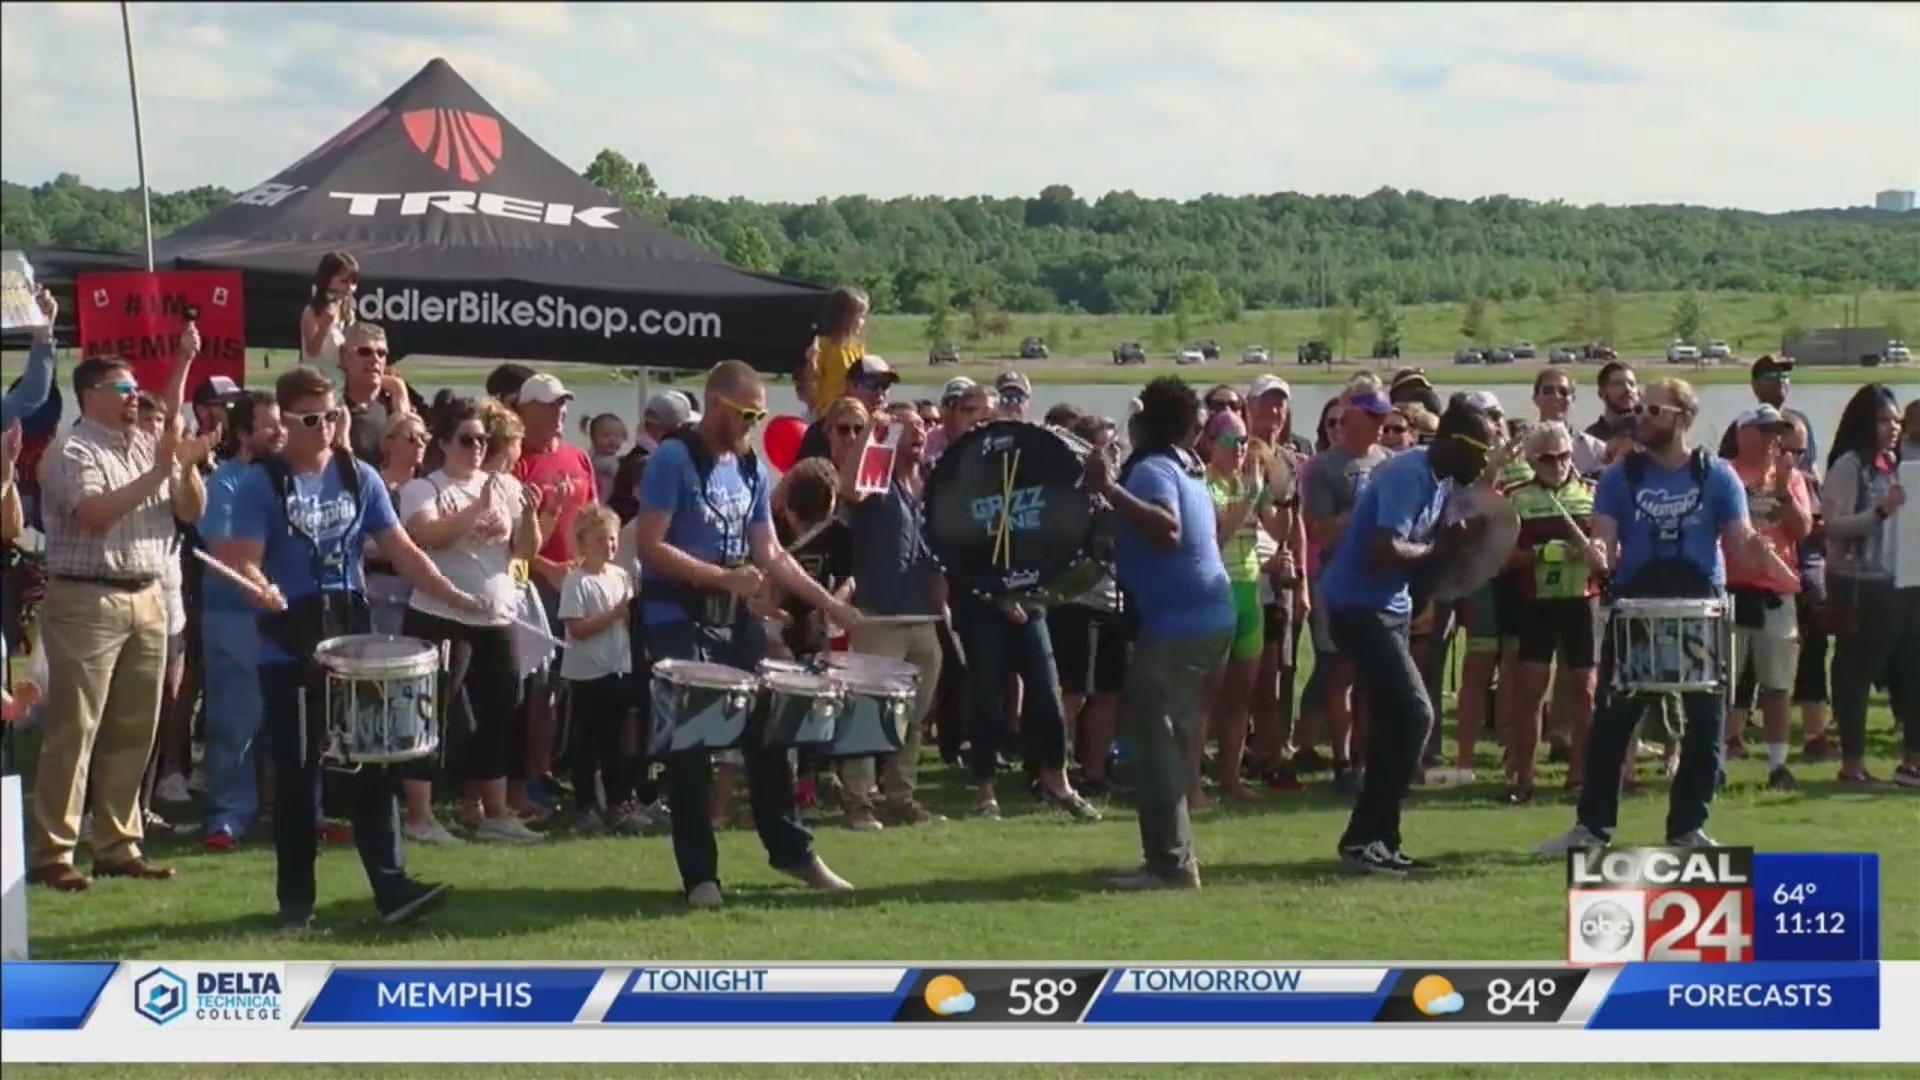 Memphis Tourism & Sports Council host pep rally in hopes of luring Ironman to the bluff city